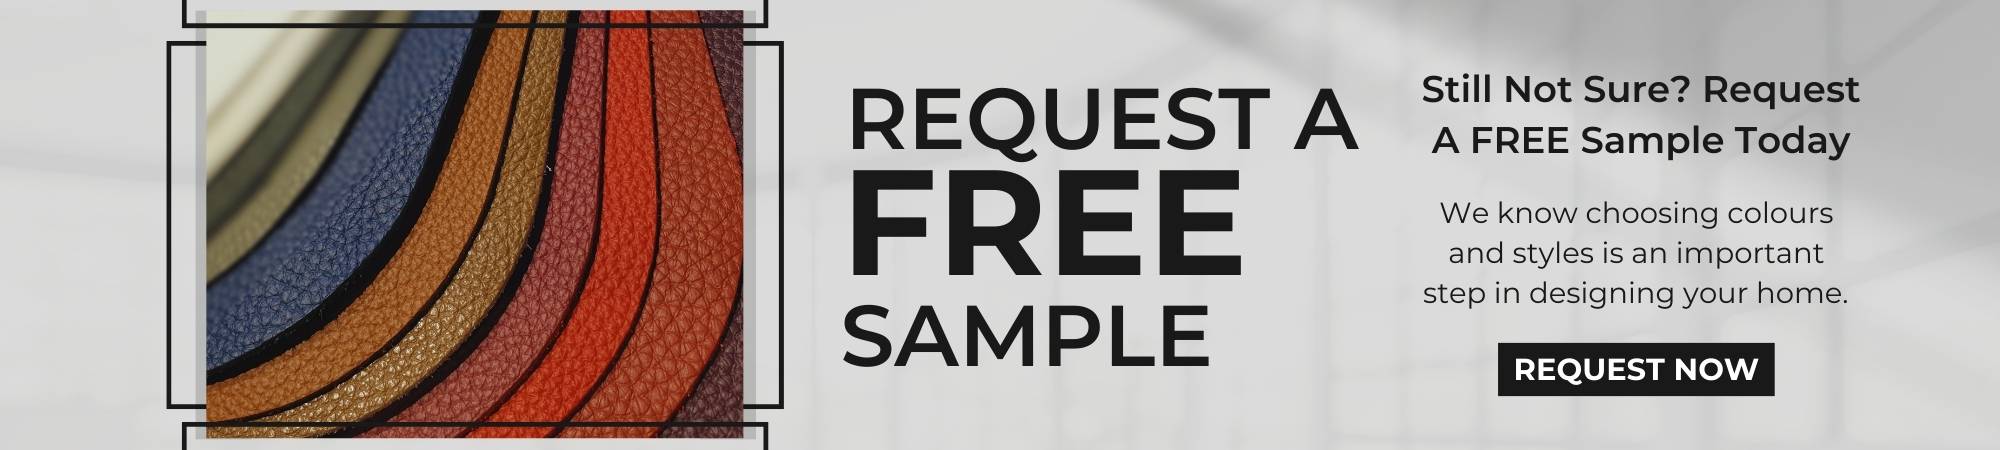 Request A FREE Sample Today